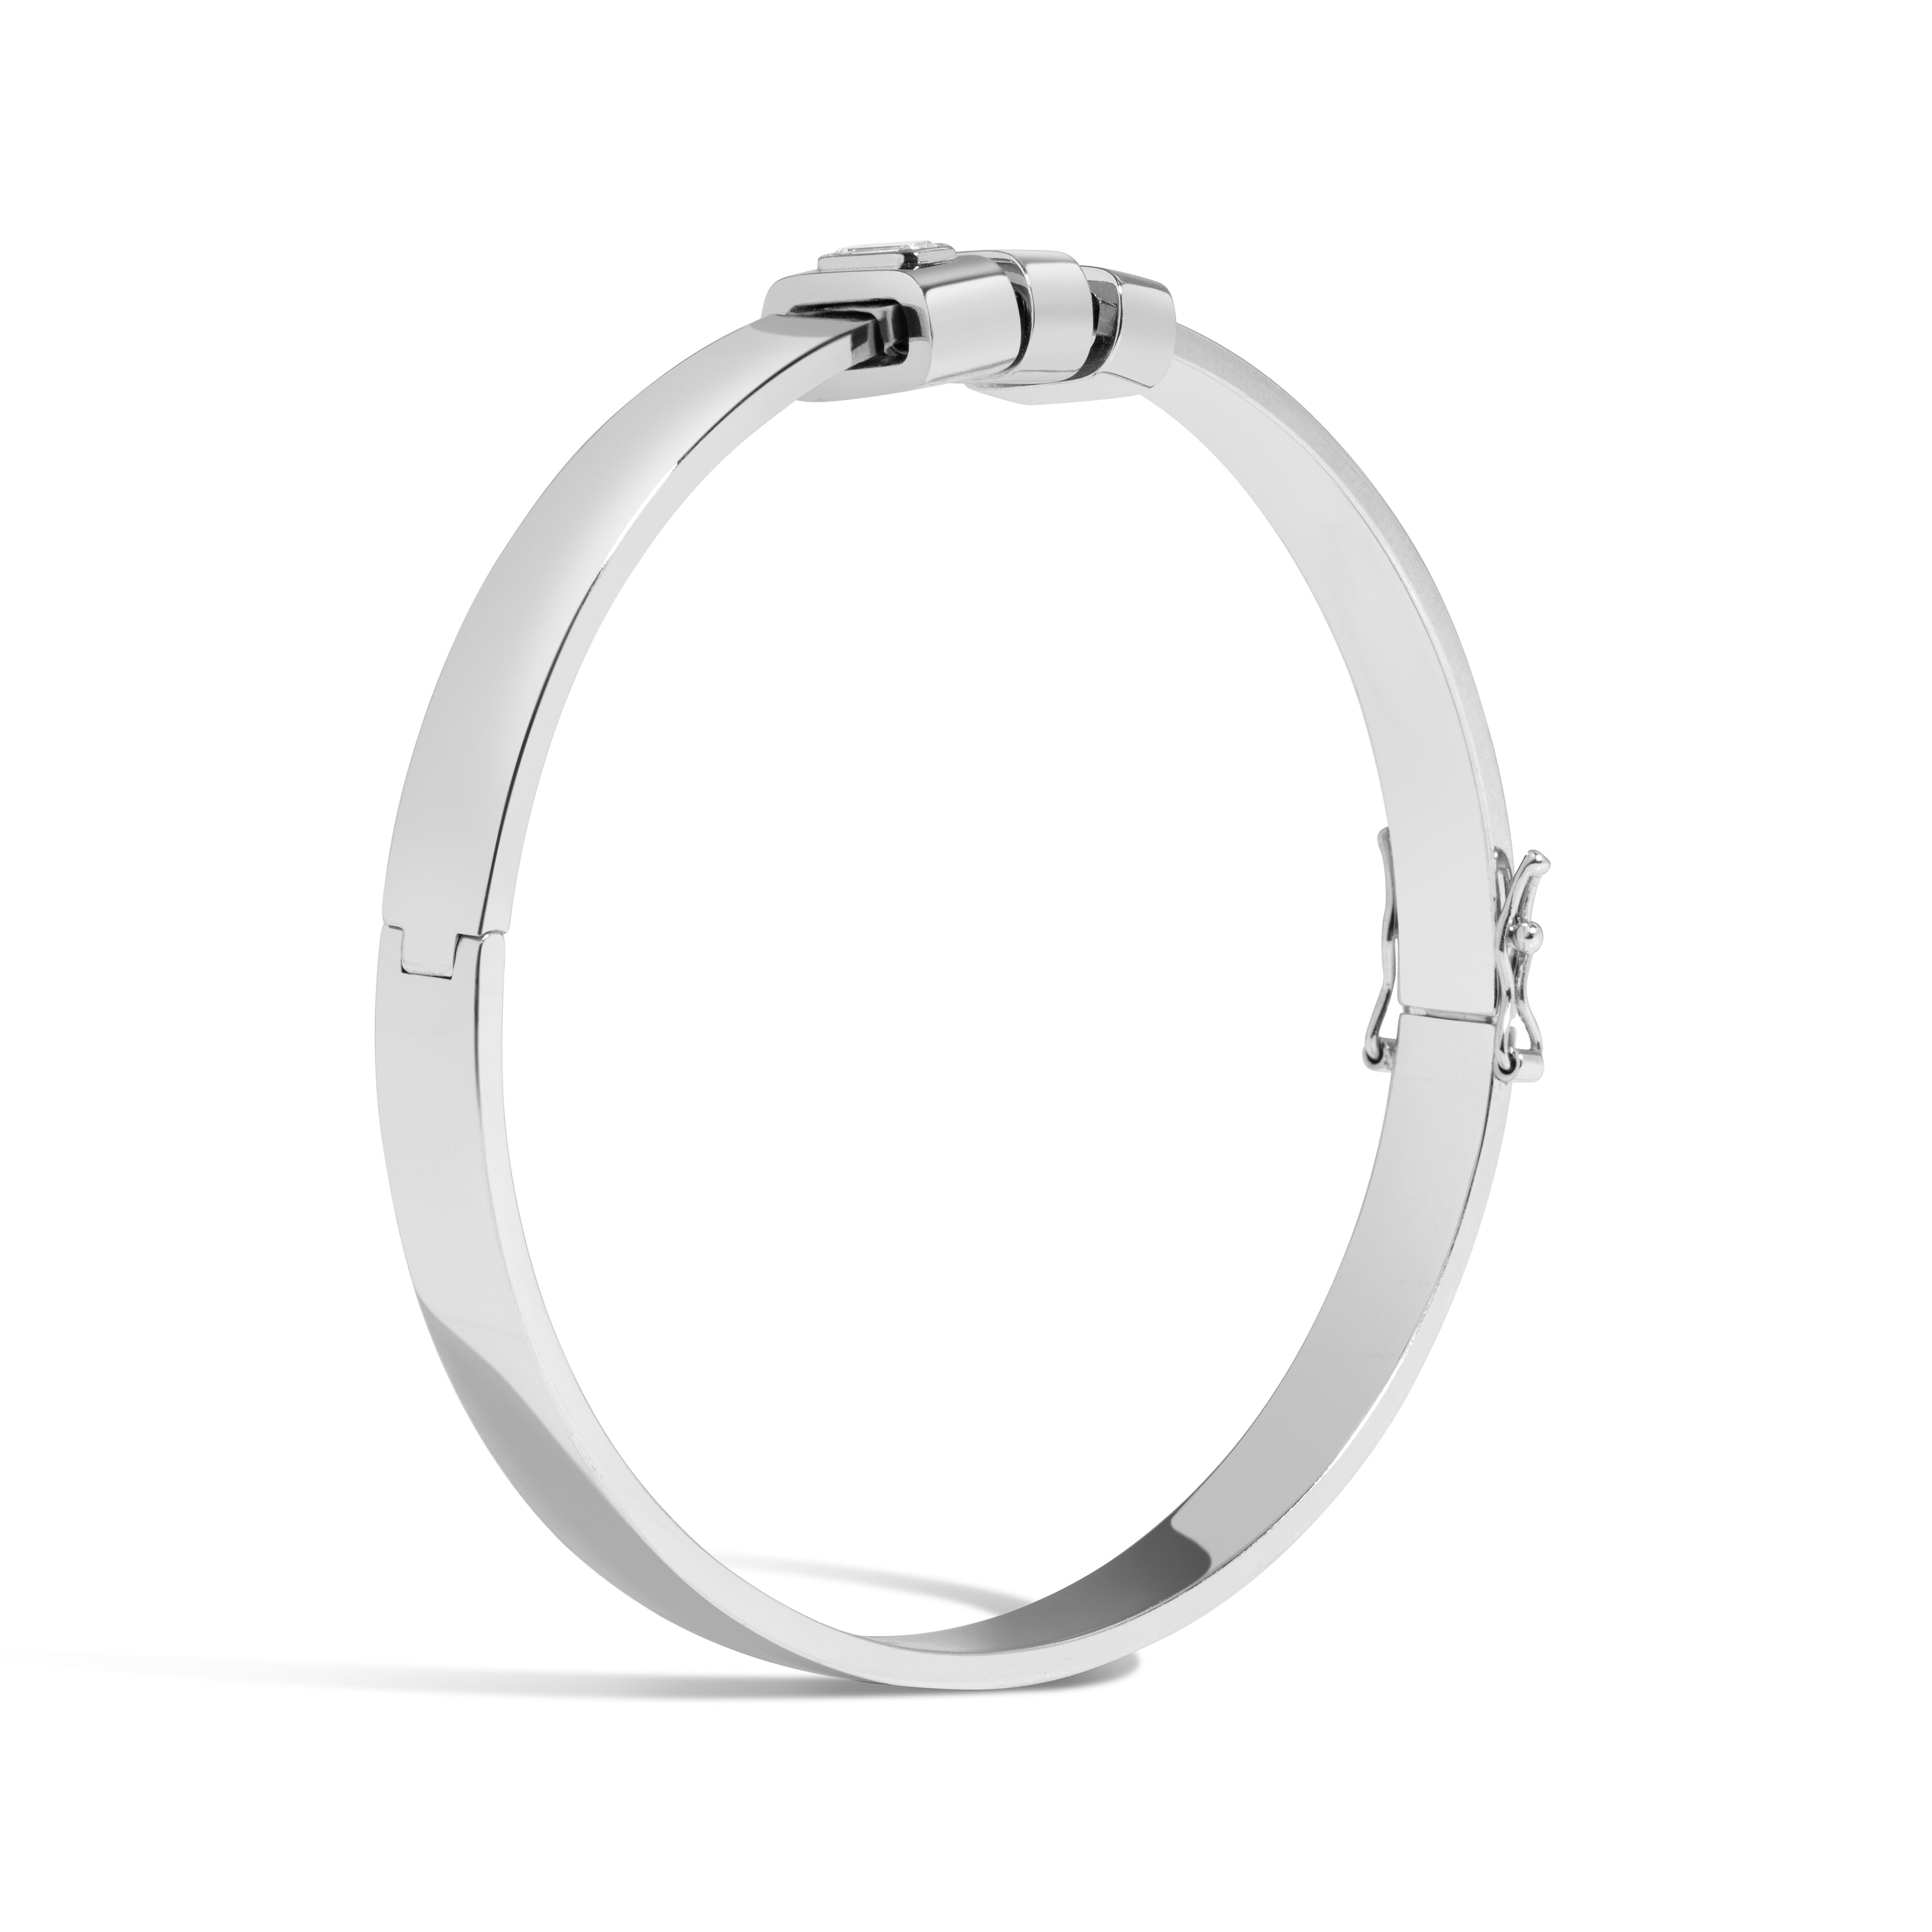 Rock Style Platinum Plated 18K Gold Bracelet For Men 19cm/12MM Thick Chain  Link Jewelry From Ao10, $32.48 | DHgate.Com